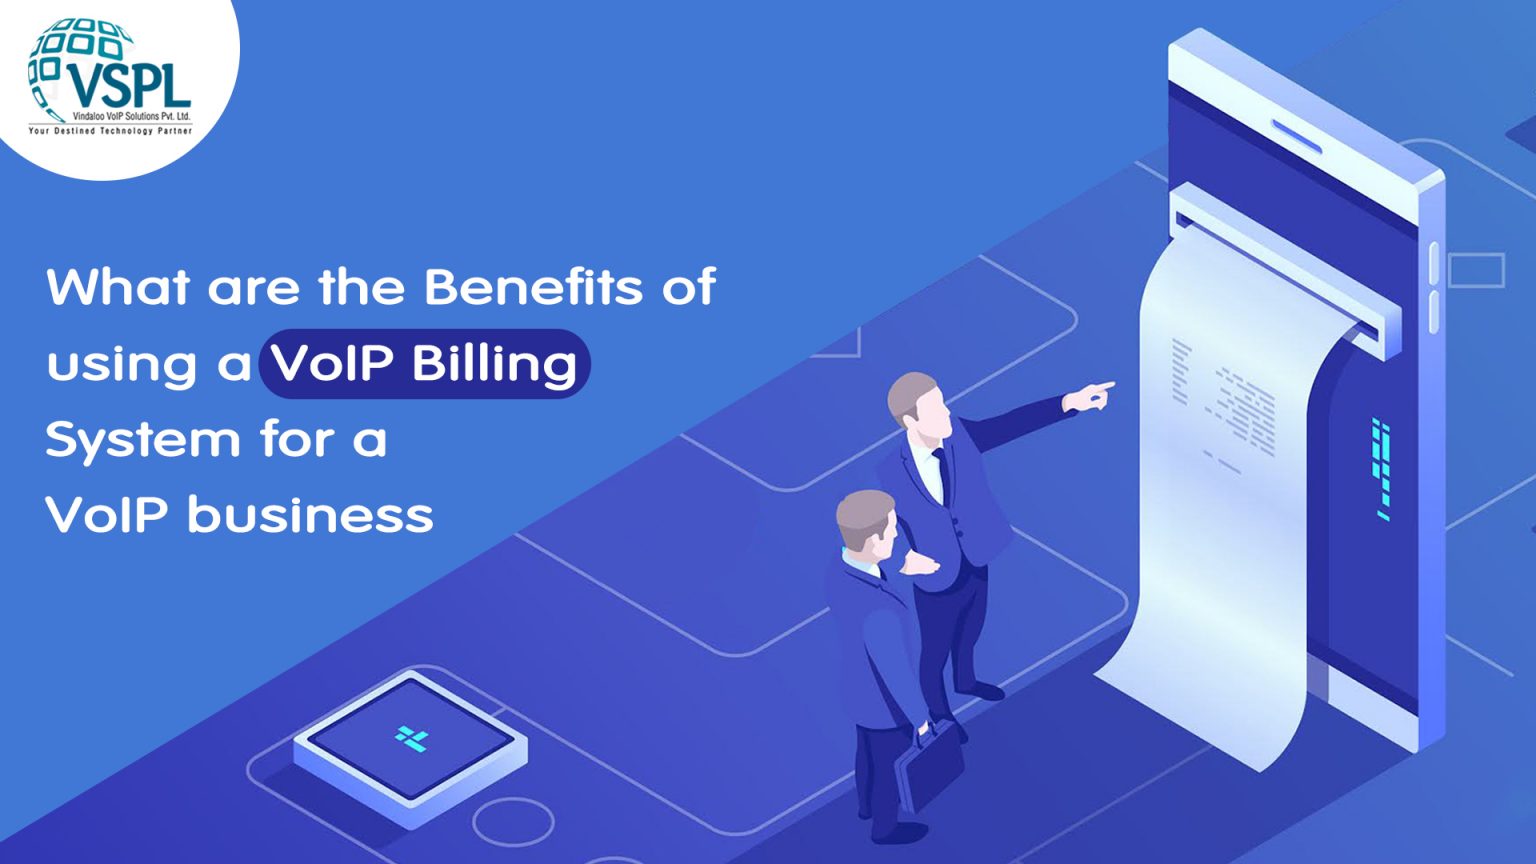 Article about What are the Benefits of using a VoIP Billing System for a VoIP business